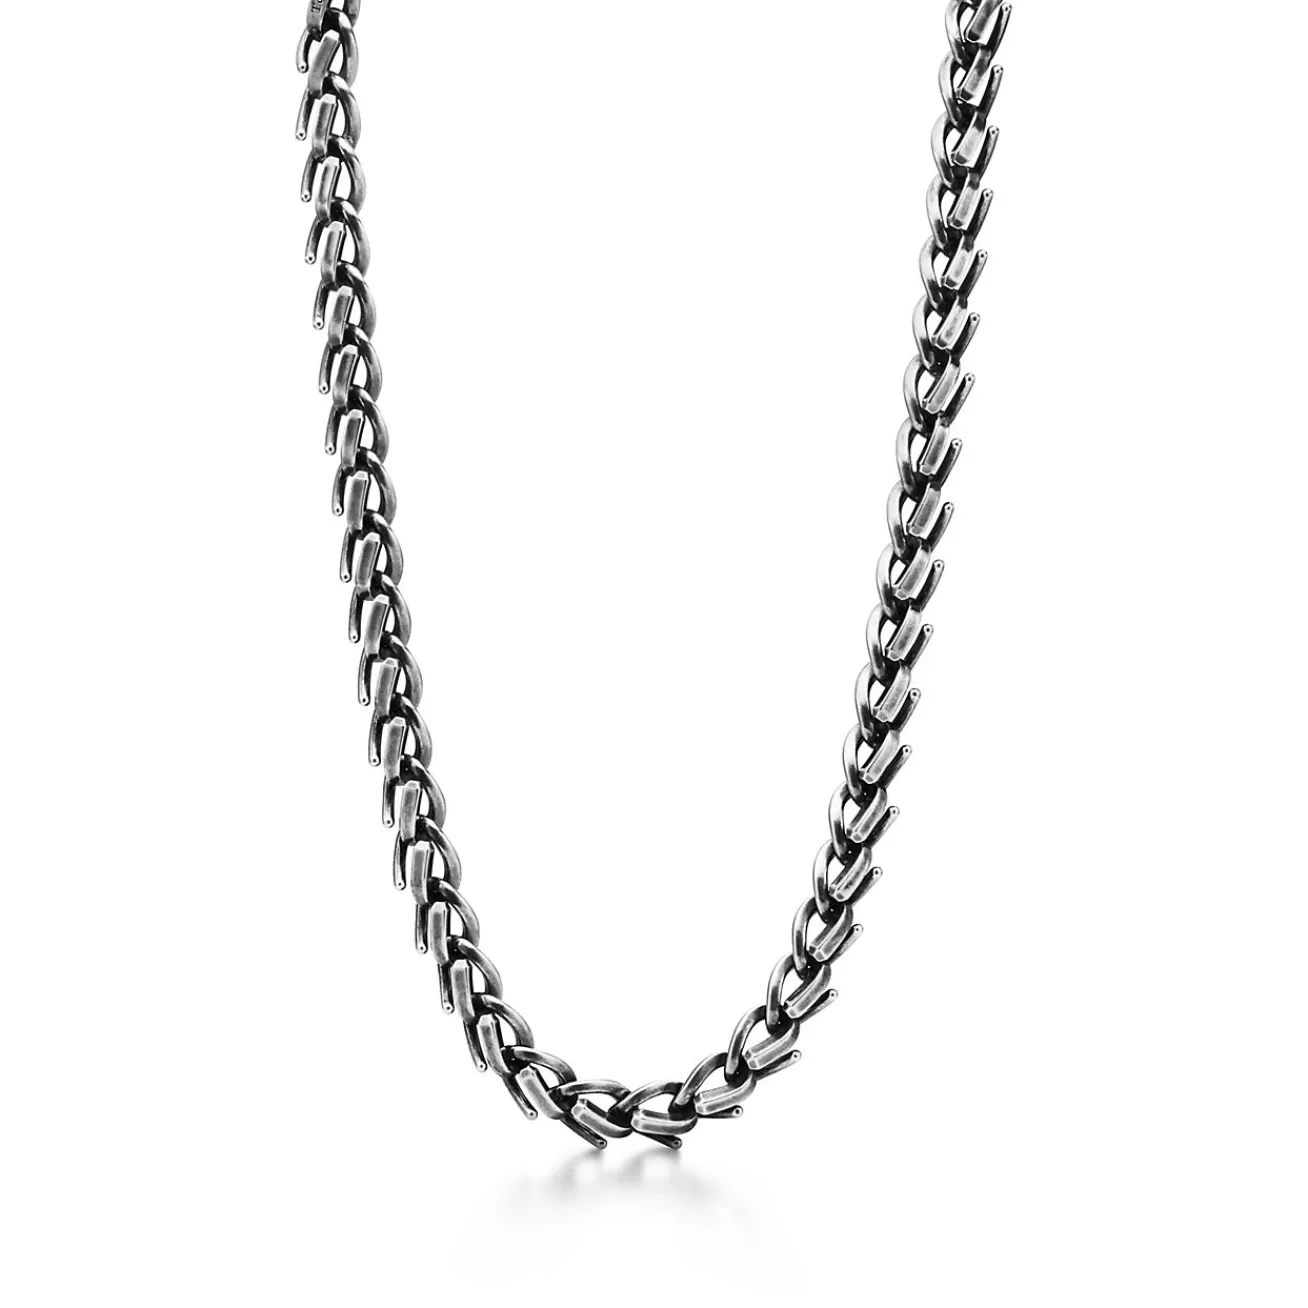 Tiffany & Co. Tiffany Forge Large Link Necklace in Blackened Sterling Silver | ^ Necklaces & Pendants | Men's Jewelry